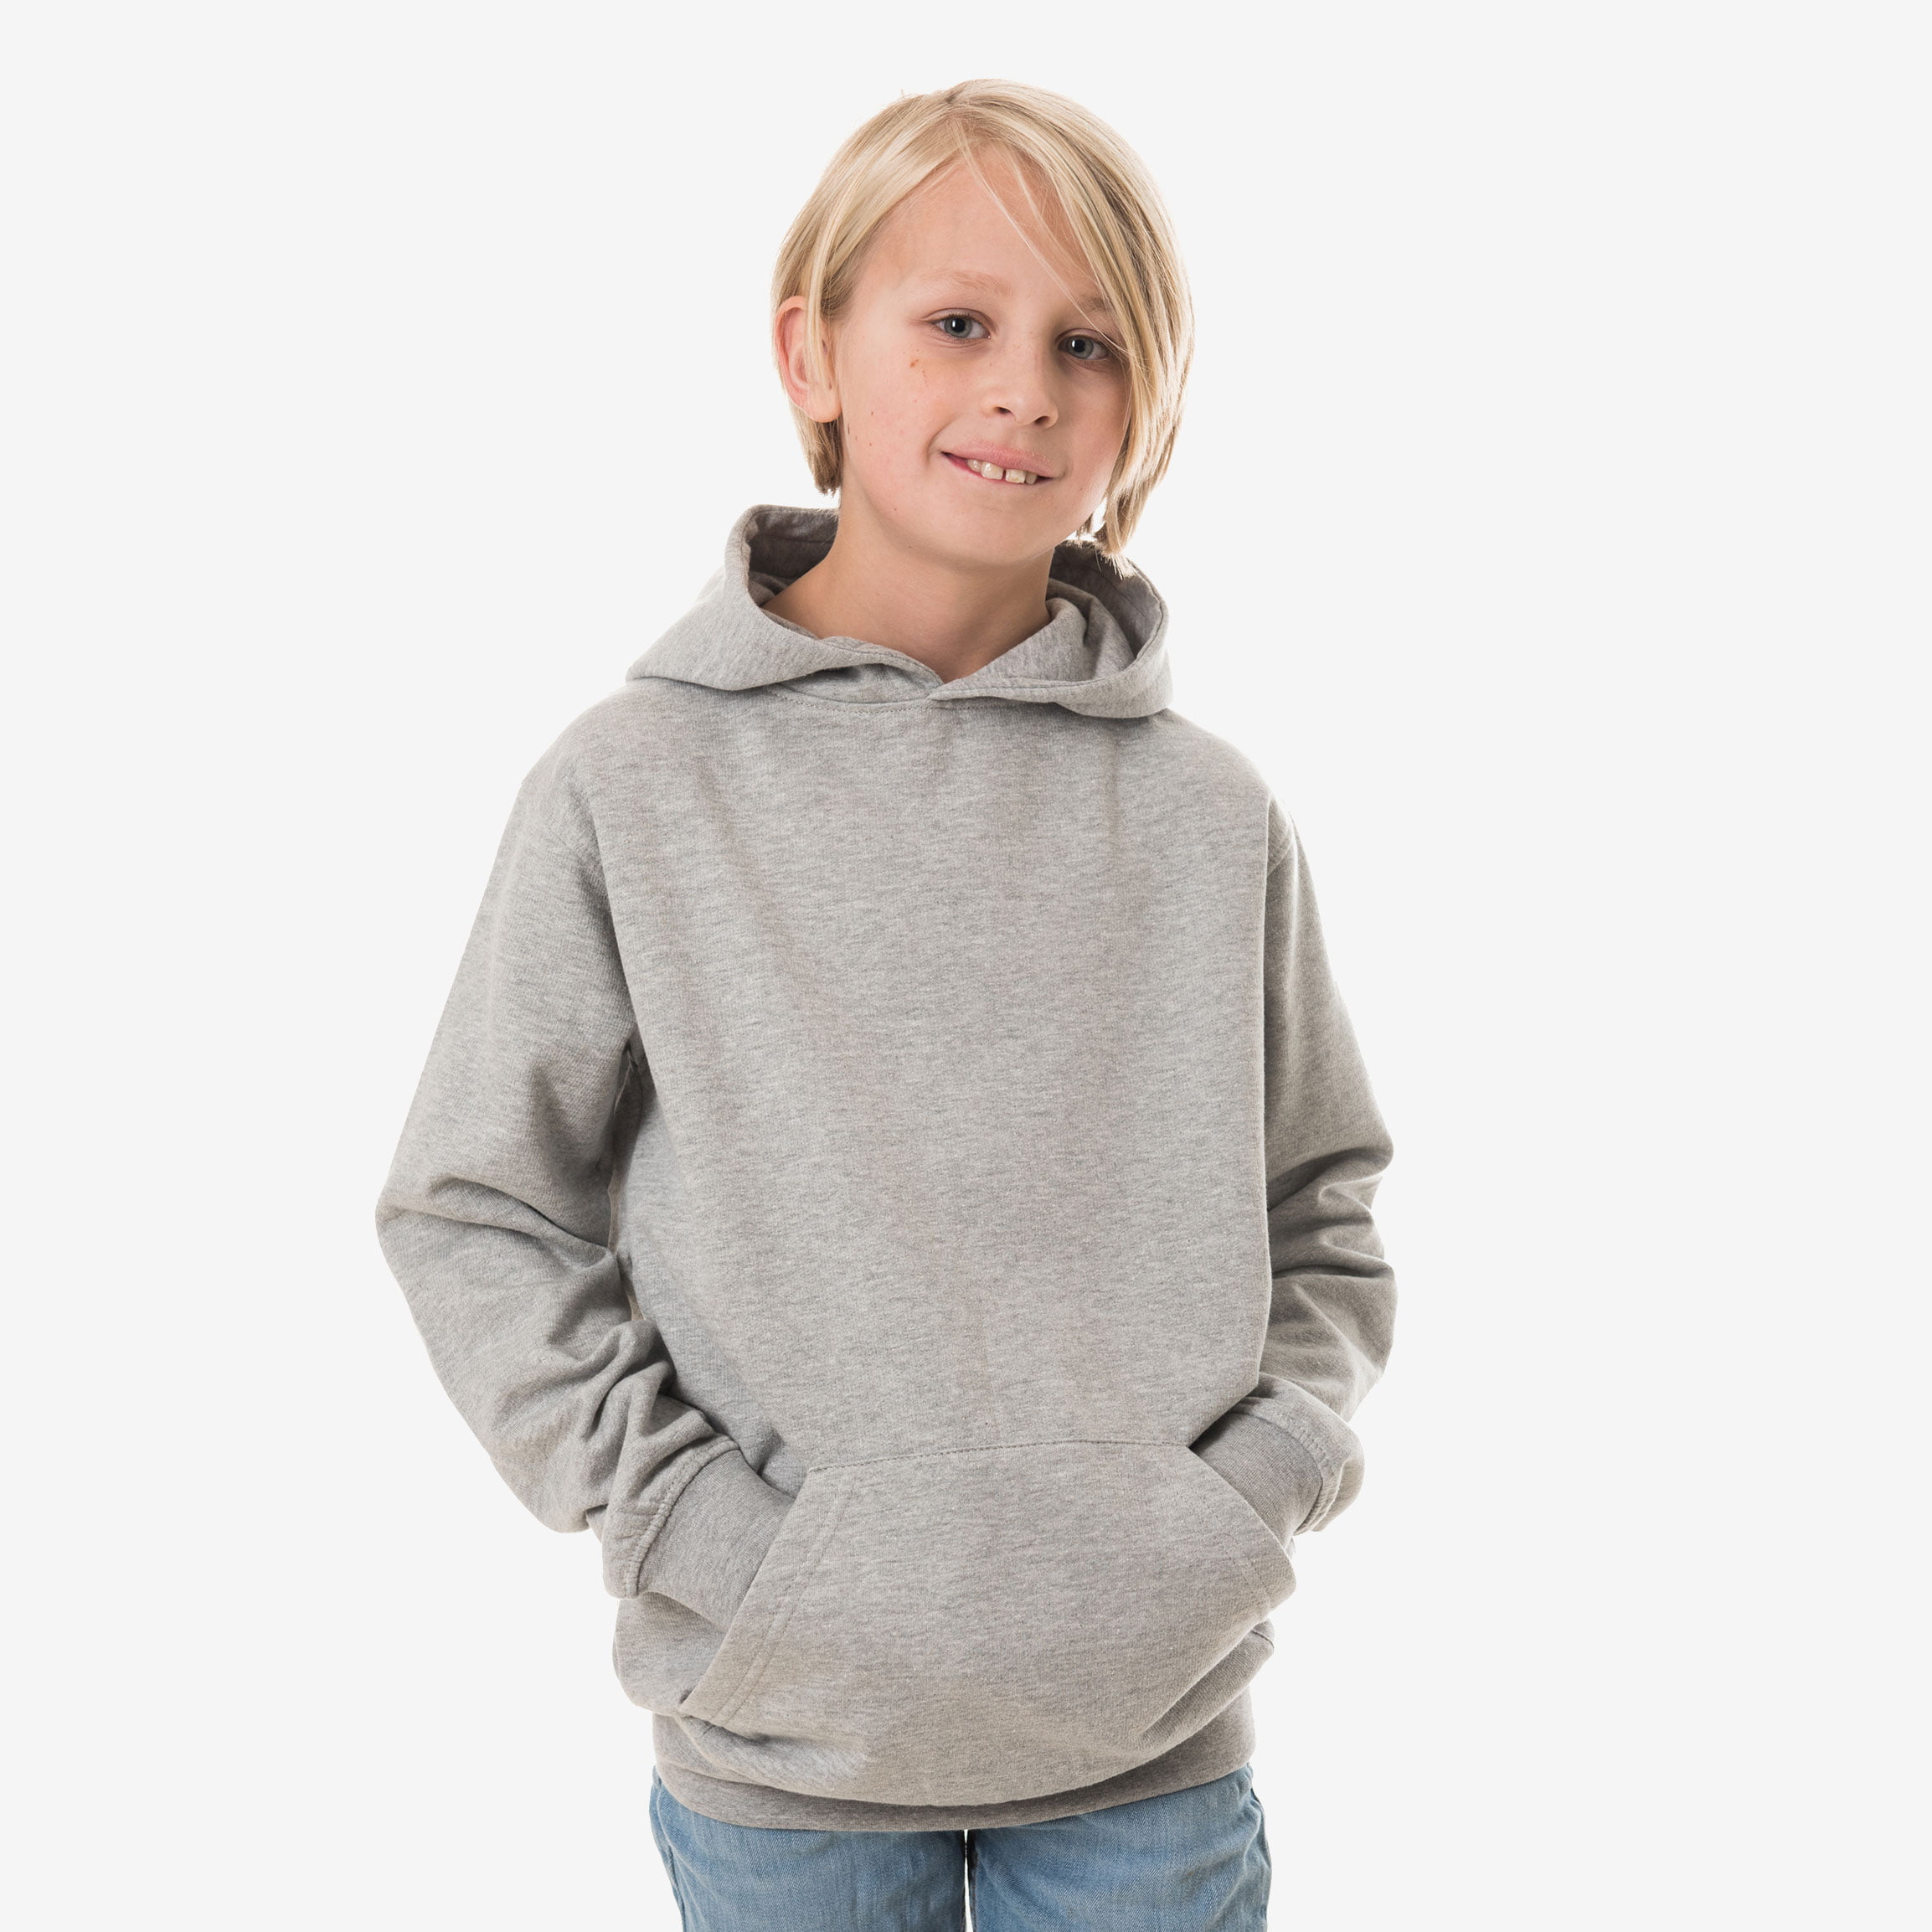 Kids over head non branded hoodie in grey